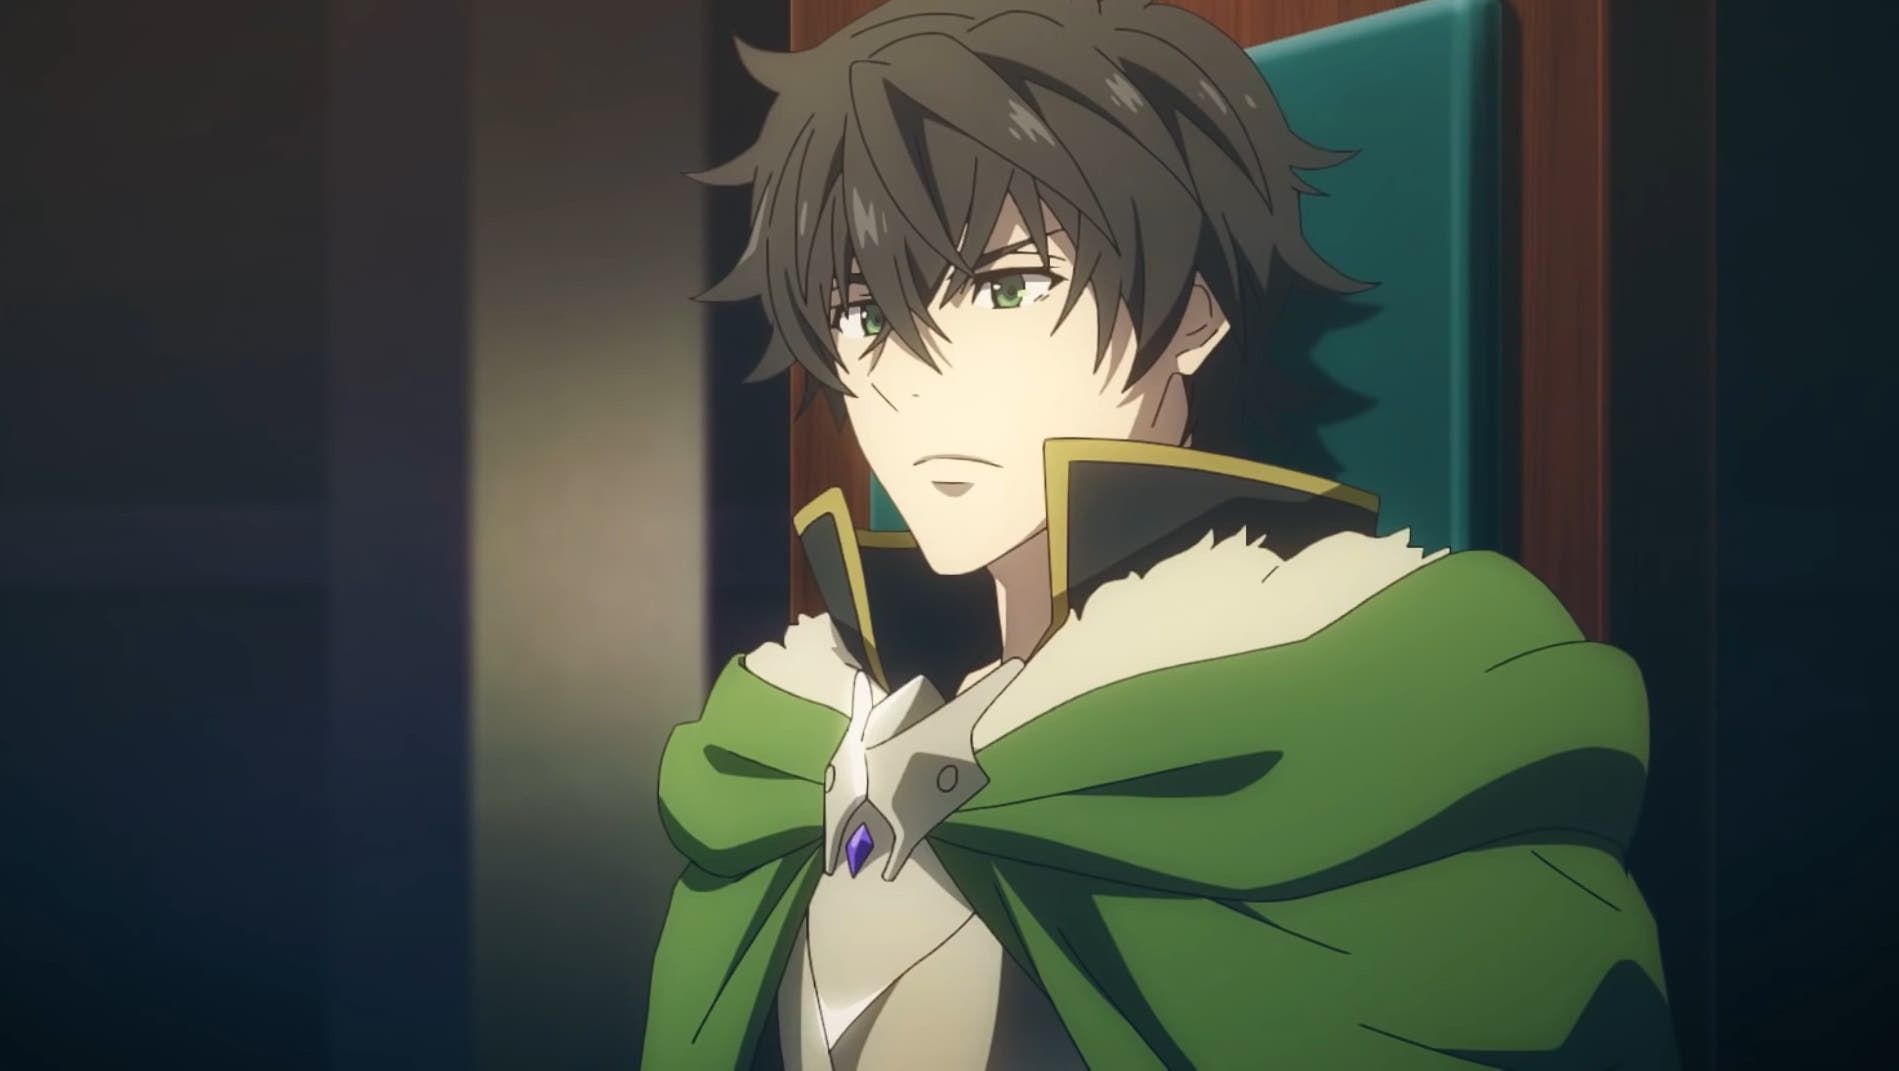 The Rising of the Shield Hero 2